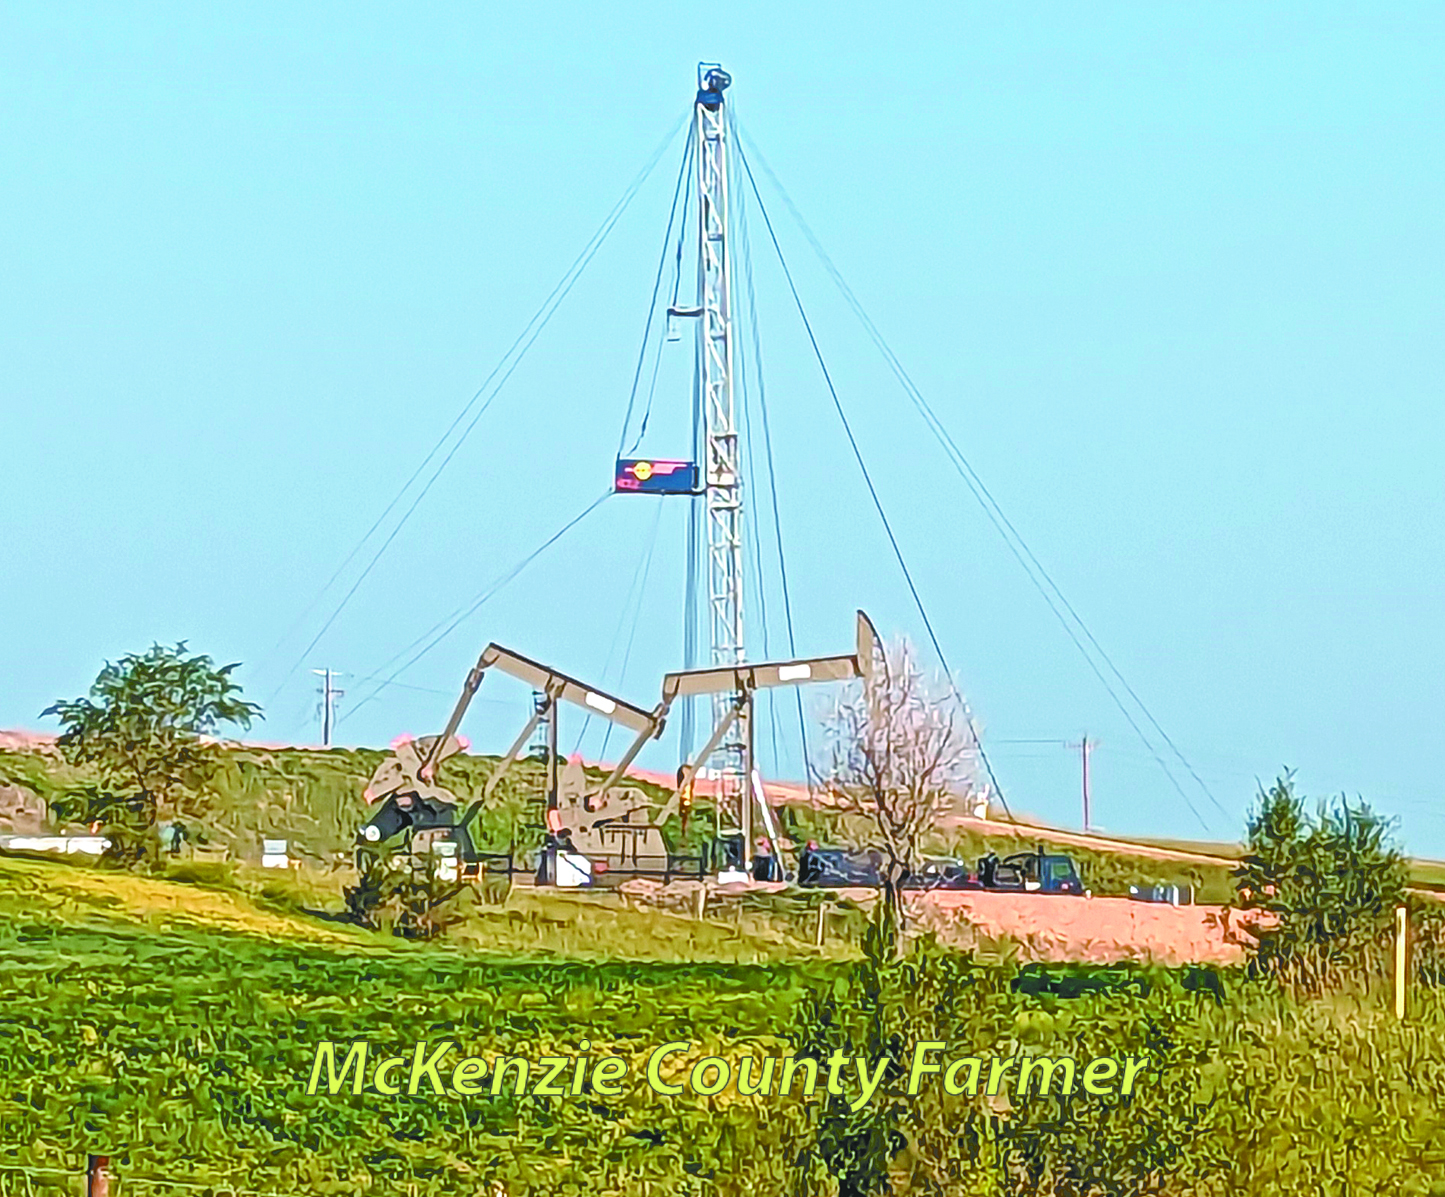 McKenzie County continues to lead state’s oil production